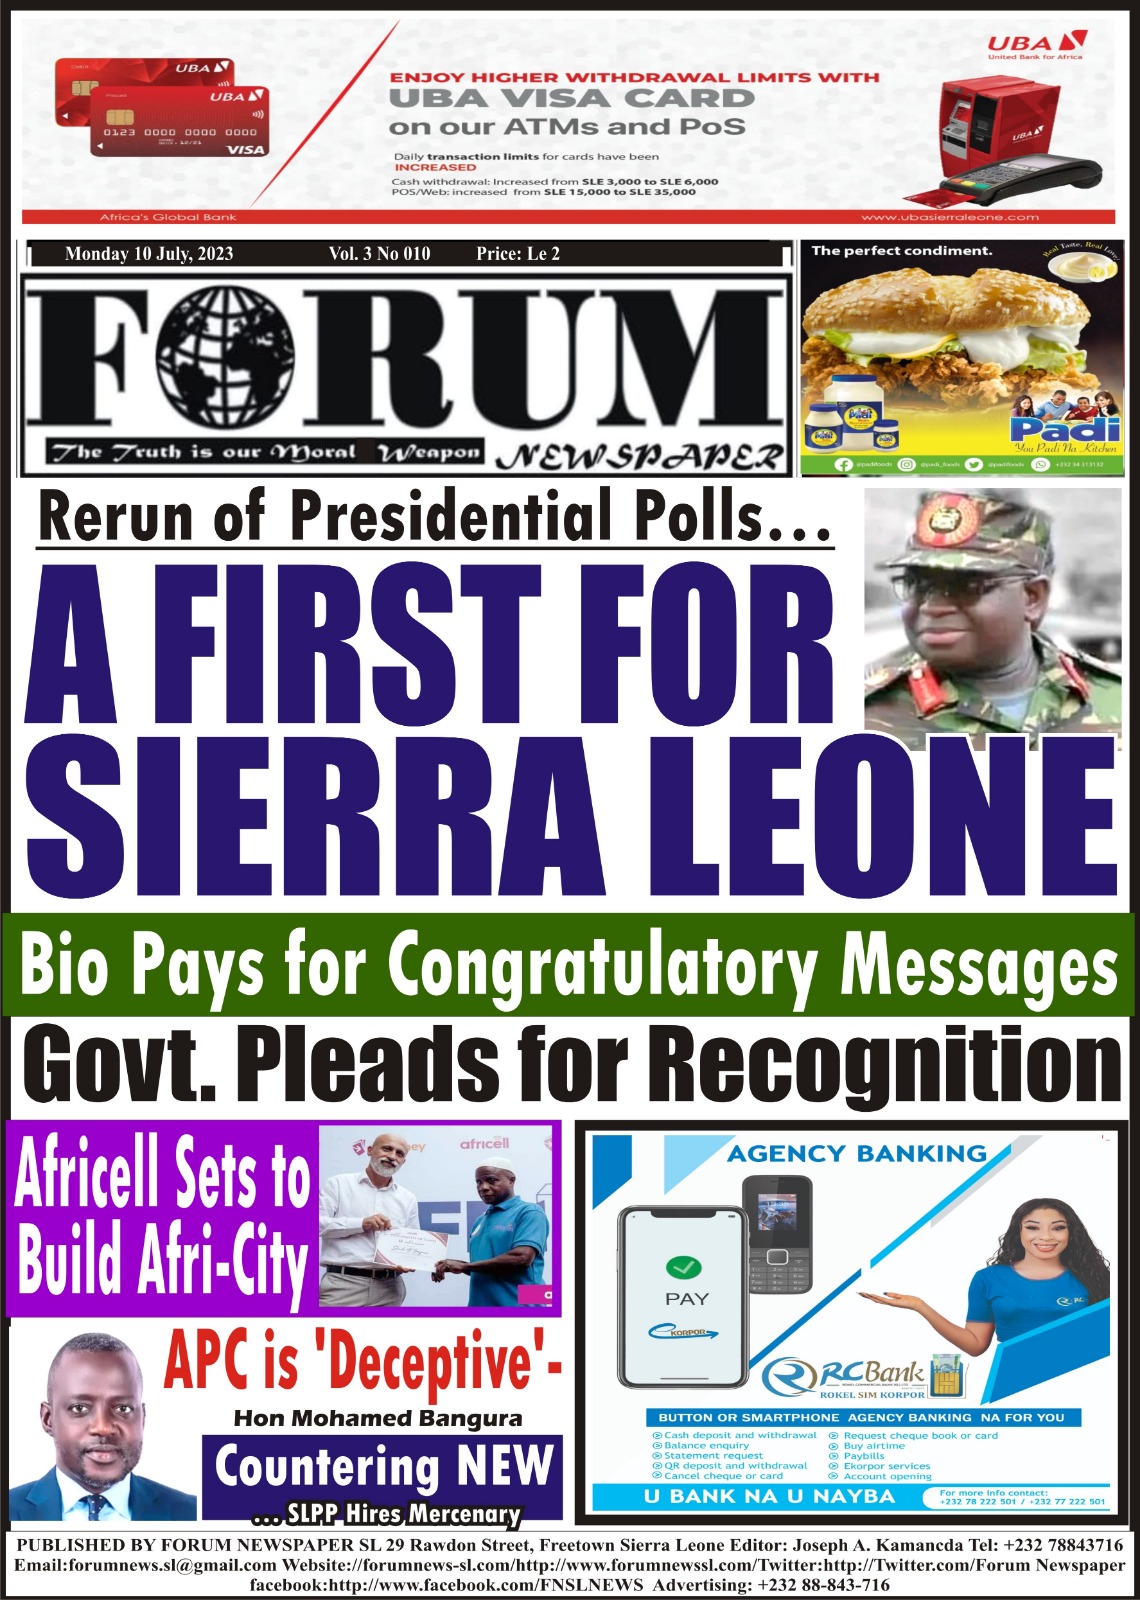 A FIRST FOR SIERRA LEONE